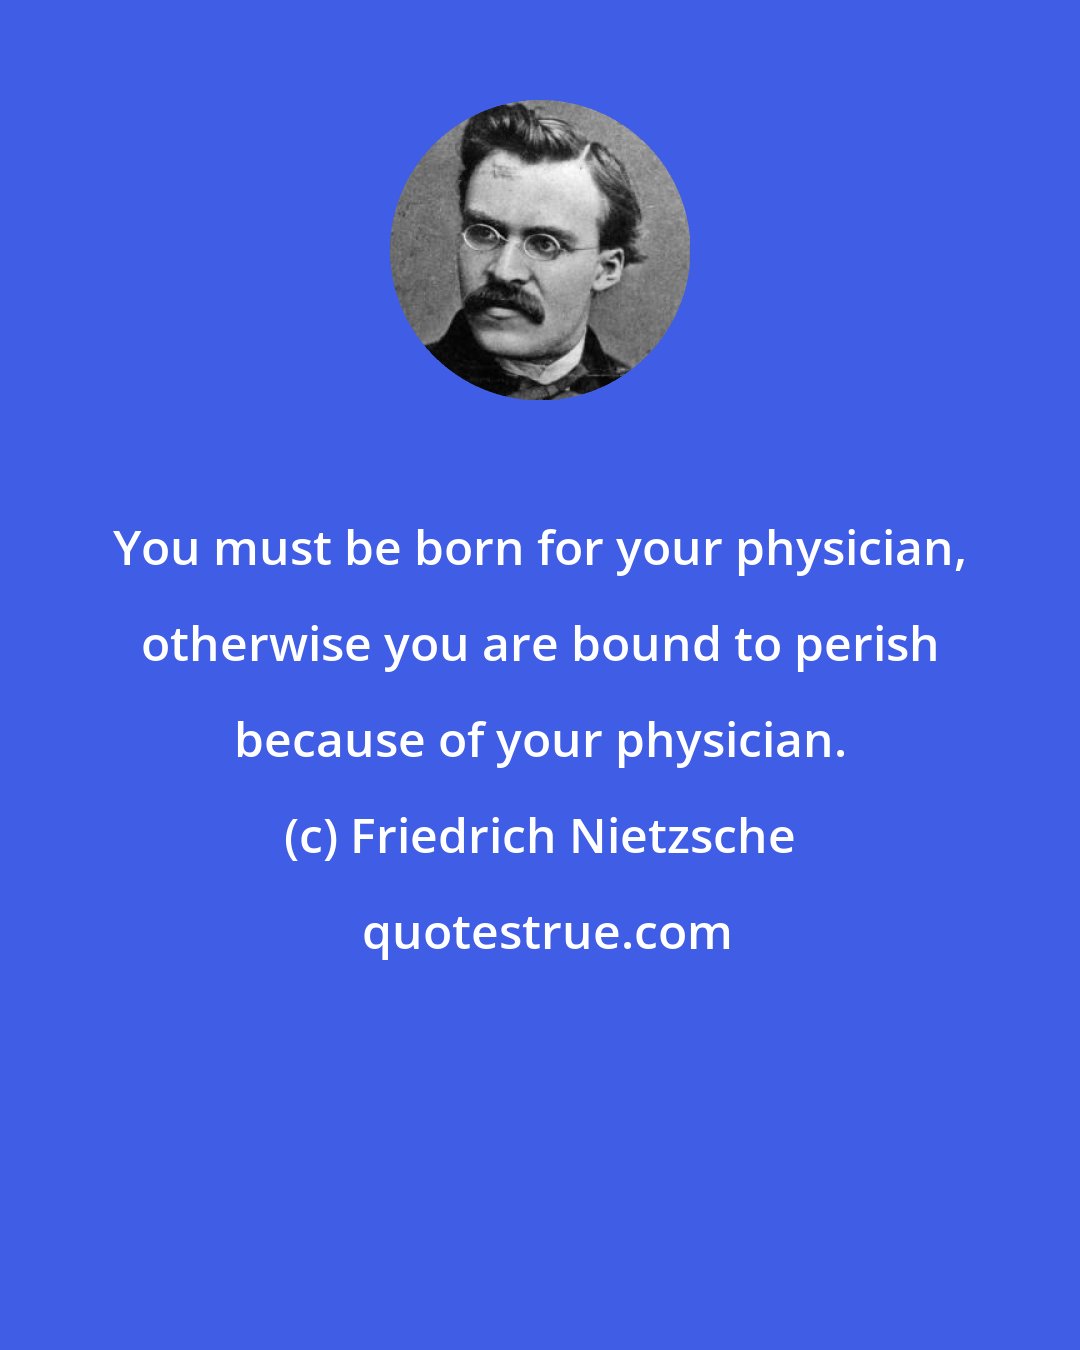 Friedrich Nietzsche: You must be born for your physician, otherwise you are bound to perish because of your physician.